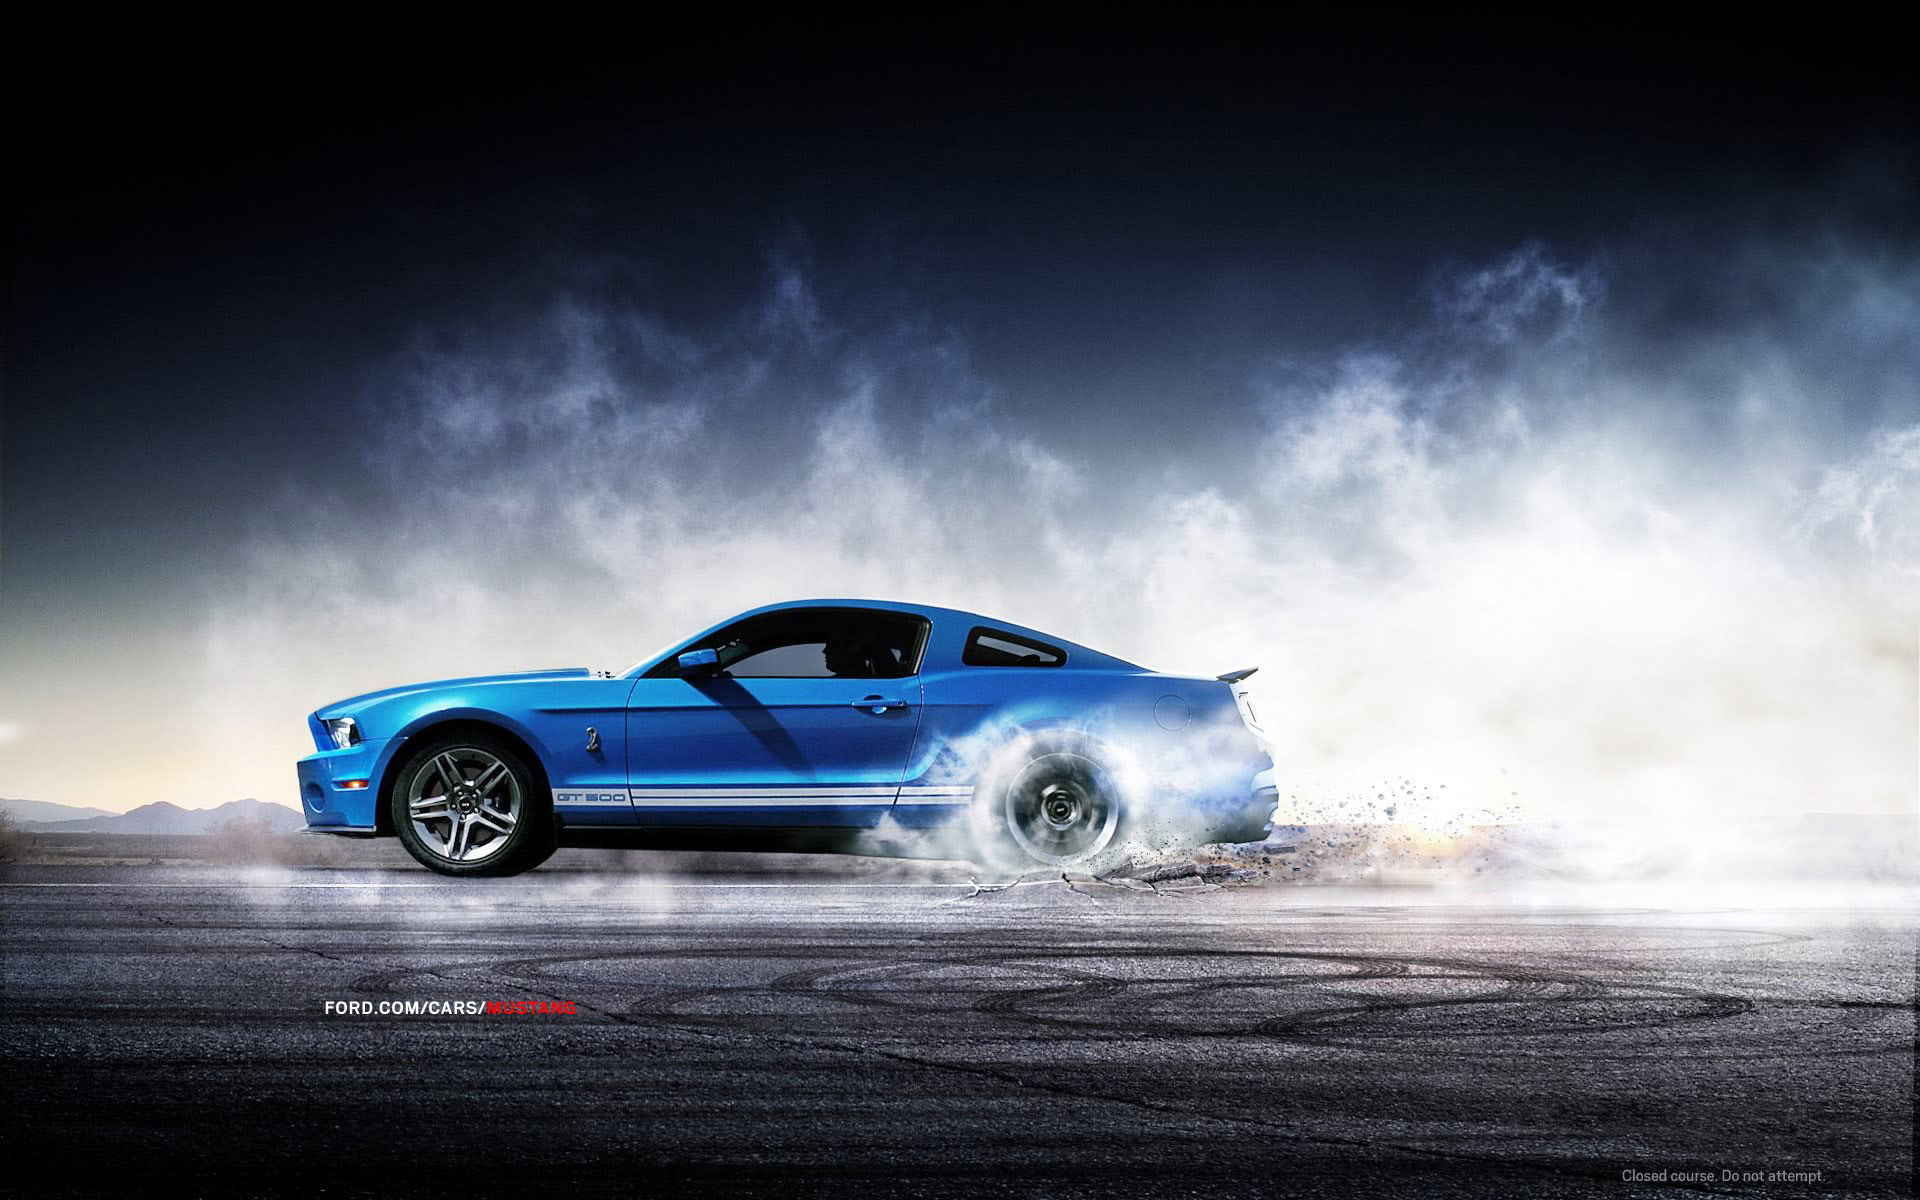 Ford Mustang Shelby Wallpaper HD Cool Walldiskpaper